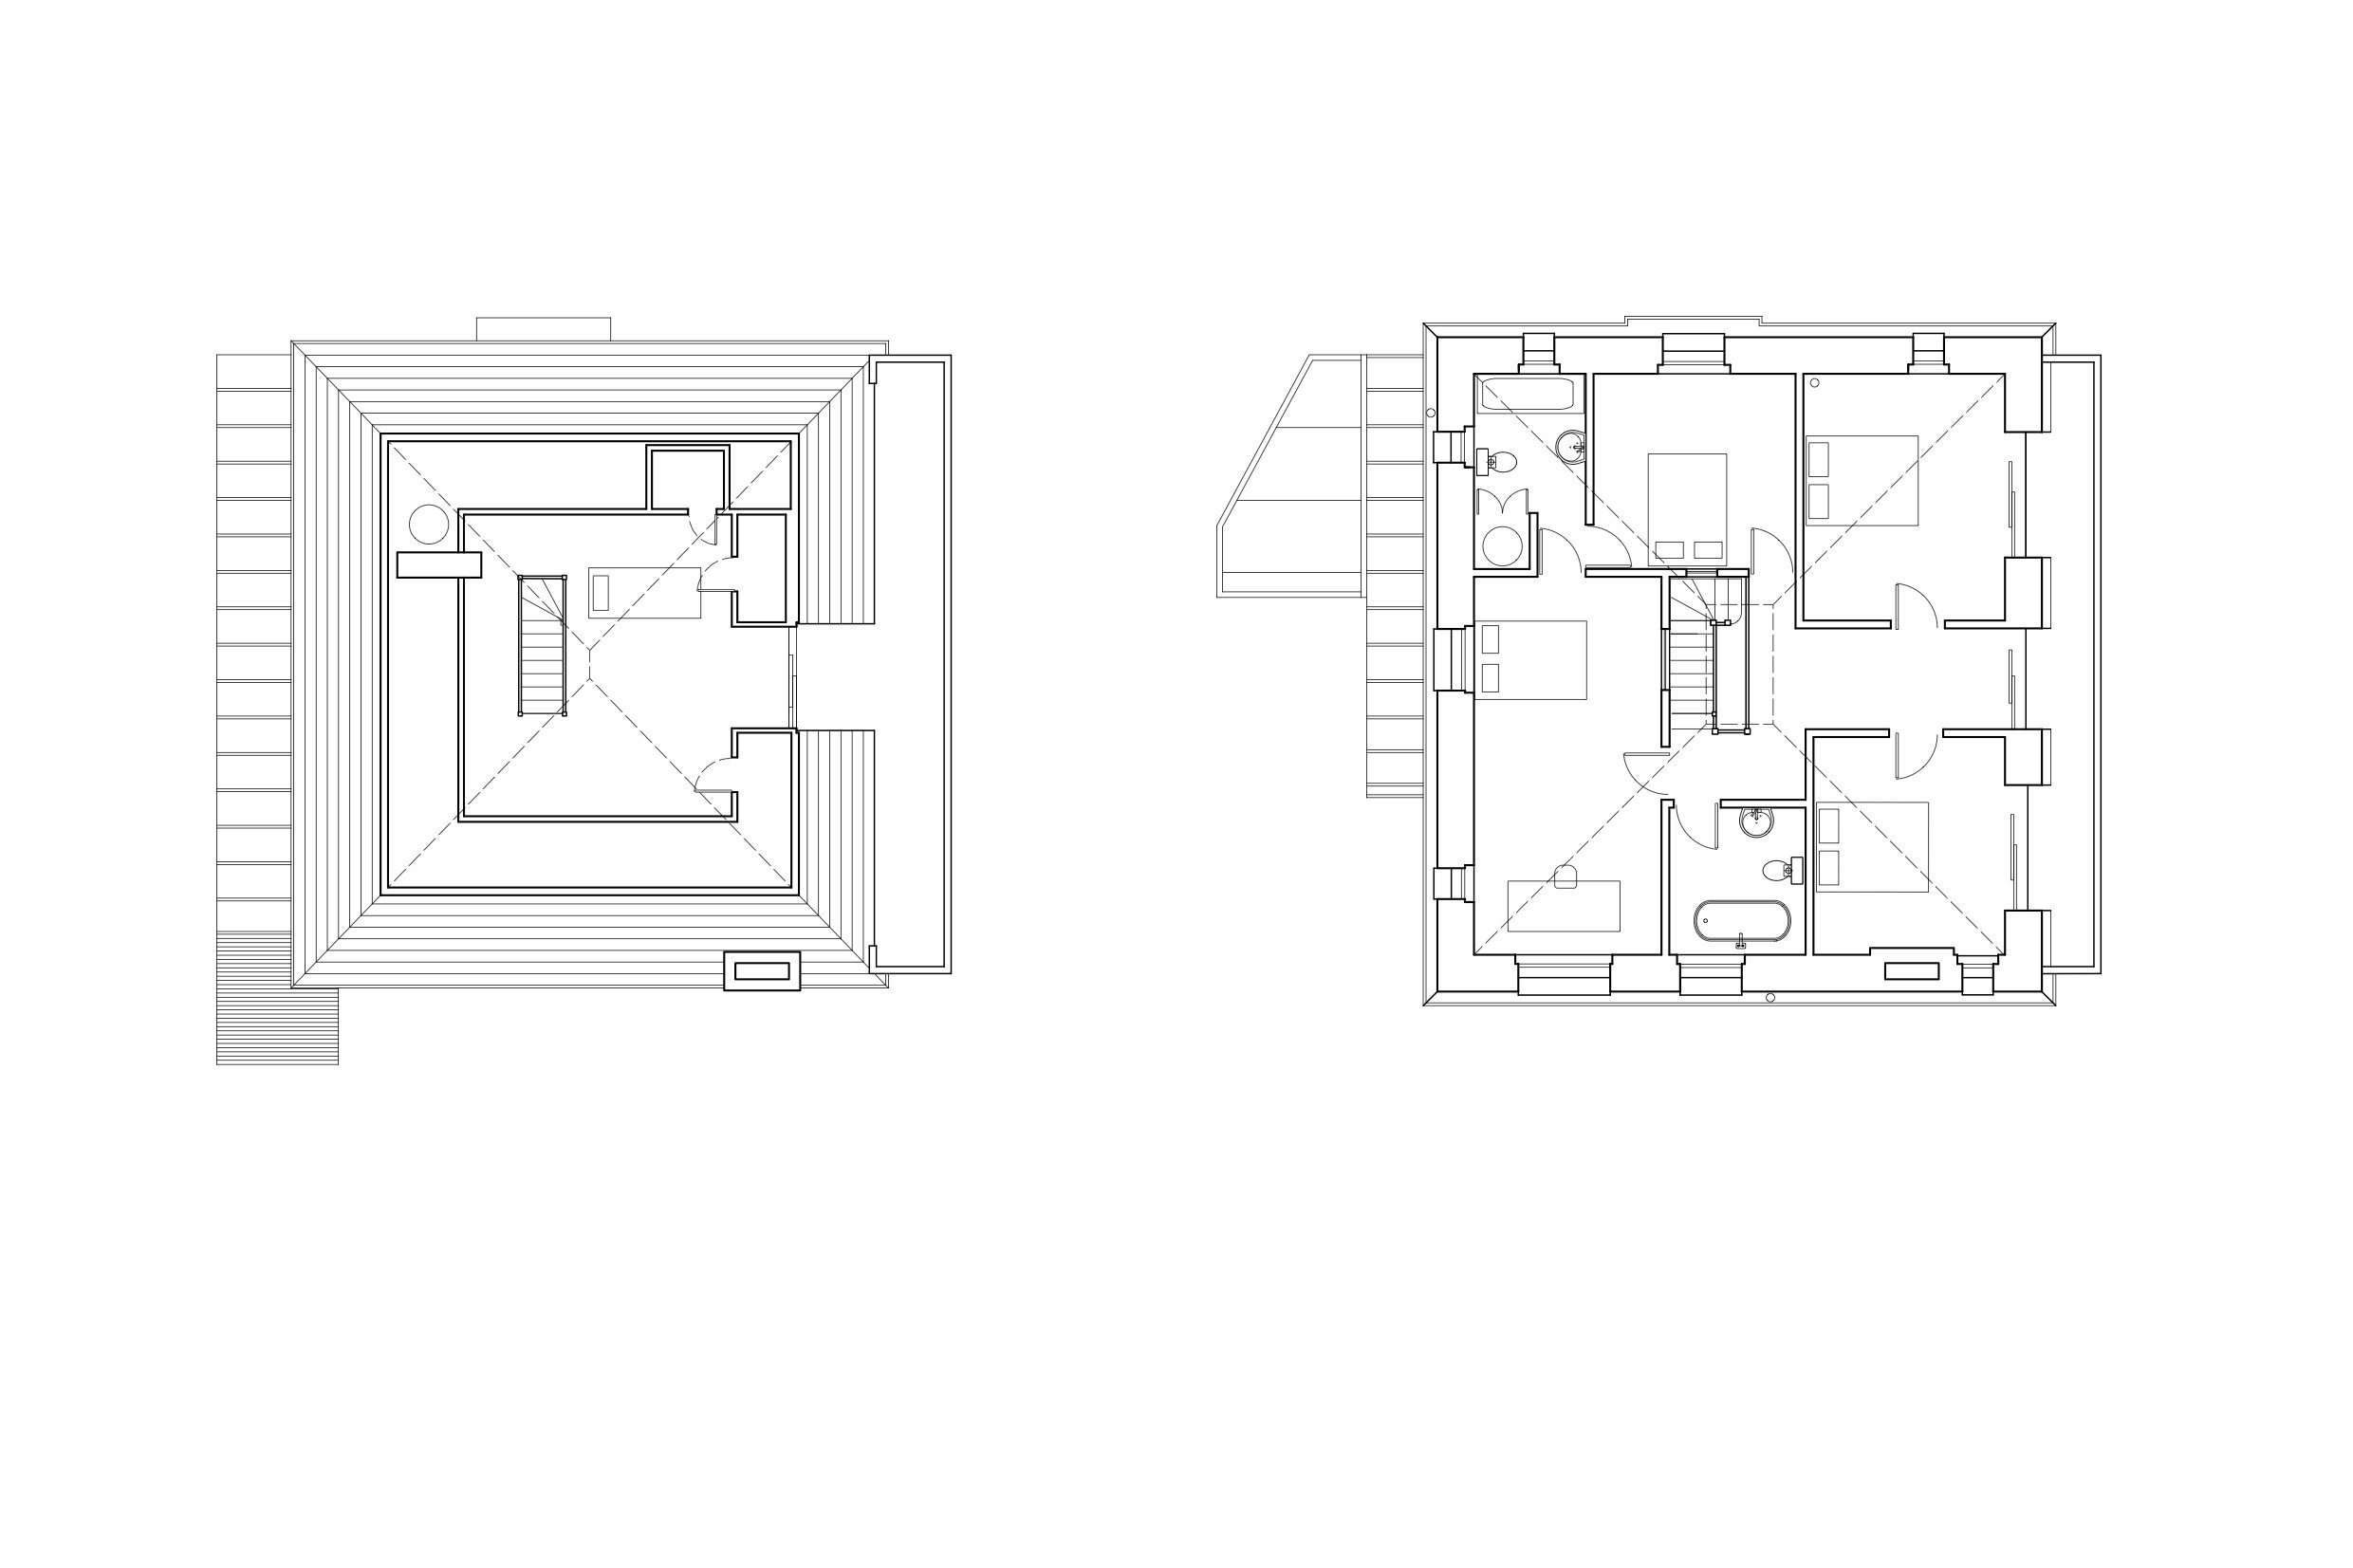 Existing and Proposed First Floor Plans